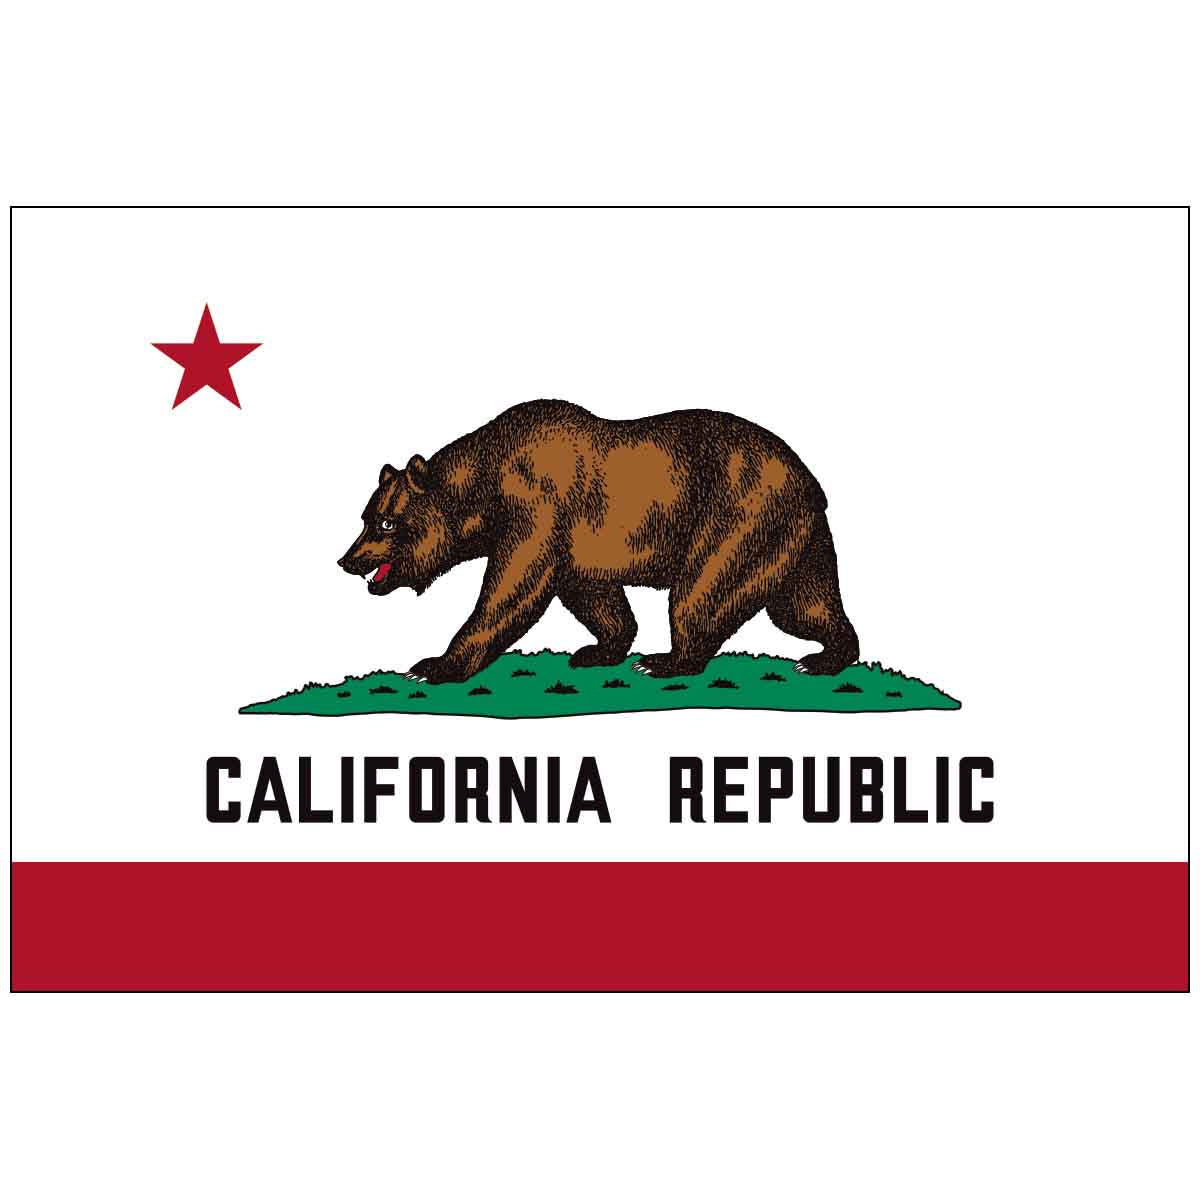 California 4" x 6" Mounted State Flag